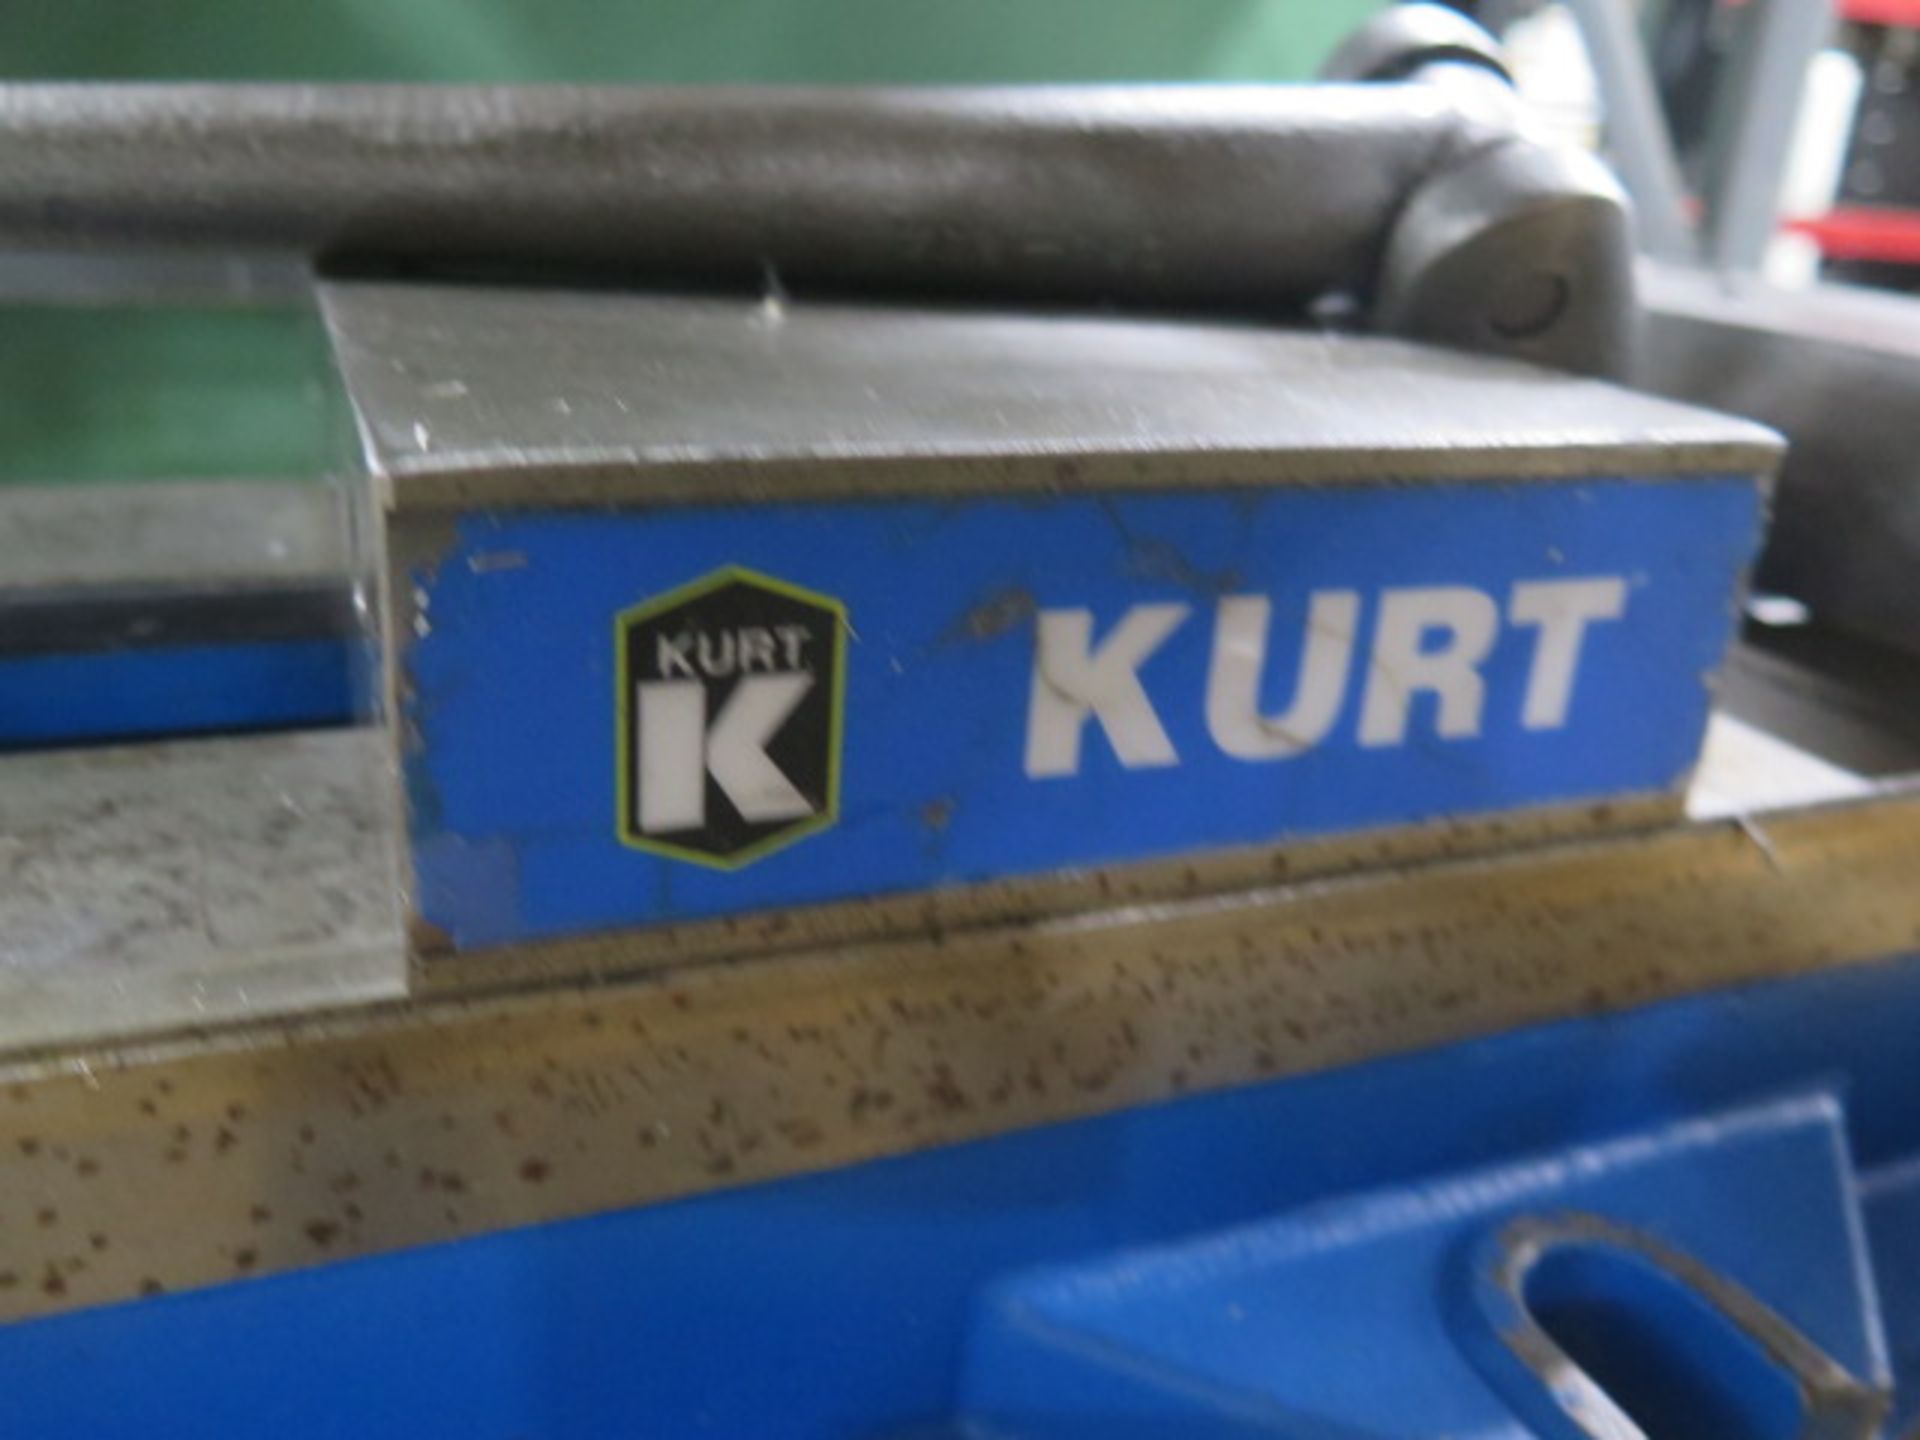 Kurt 8" Angle-Lock Vise (SOLD AS-IS - NO WARRANTY) - Image 3 of 3